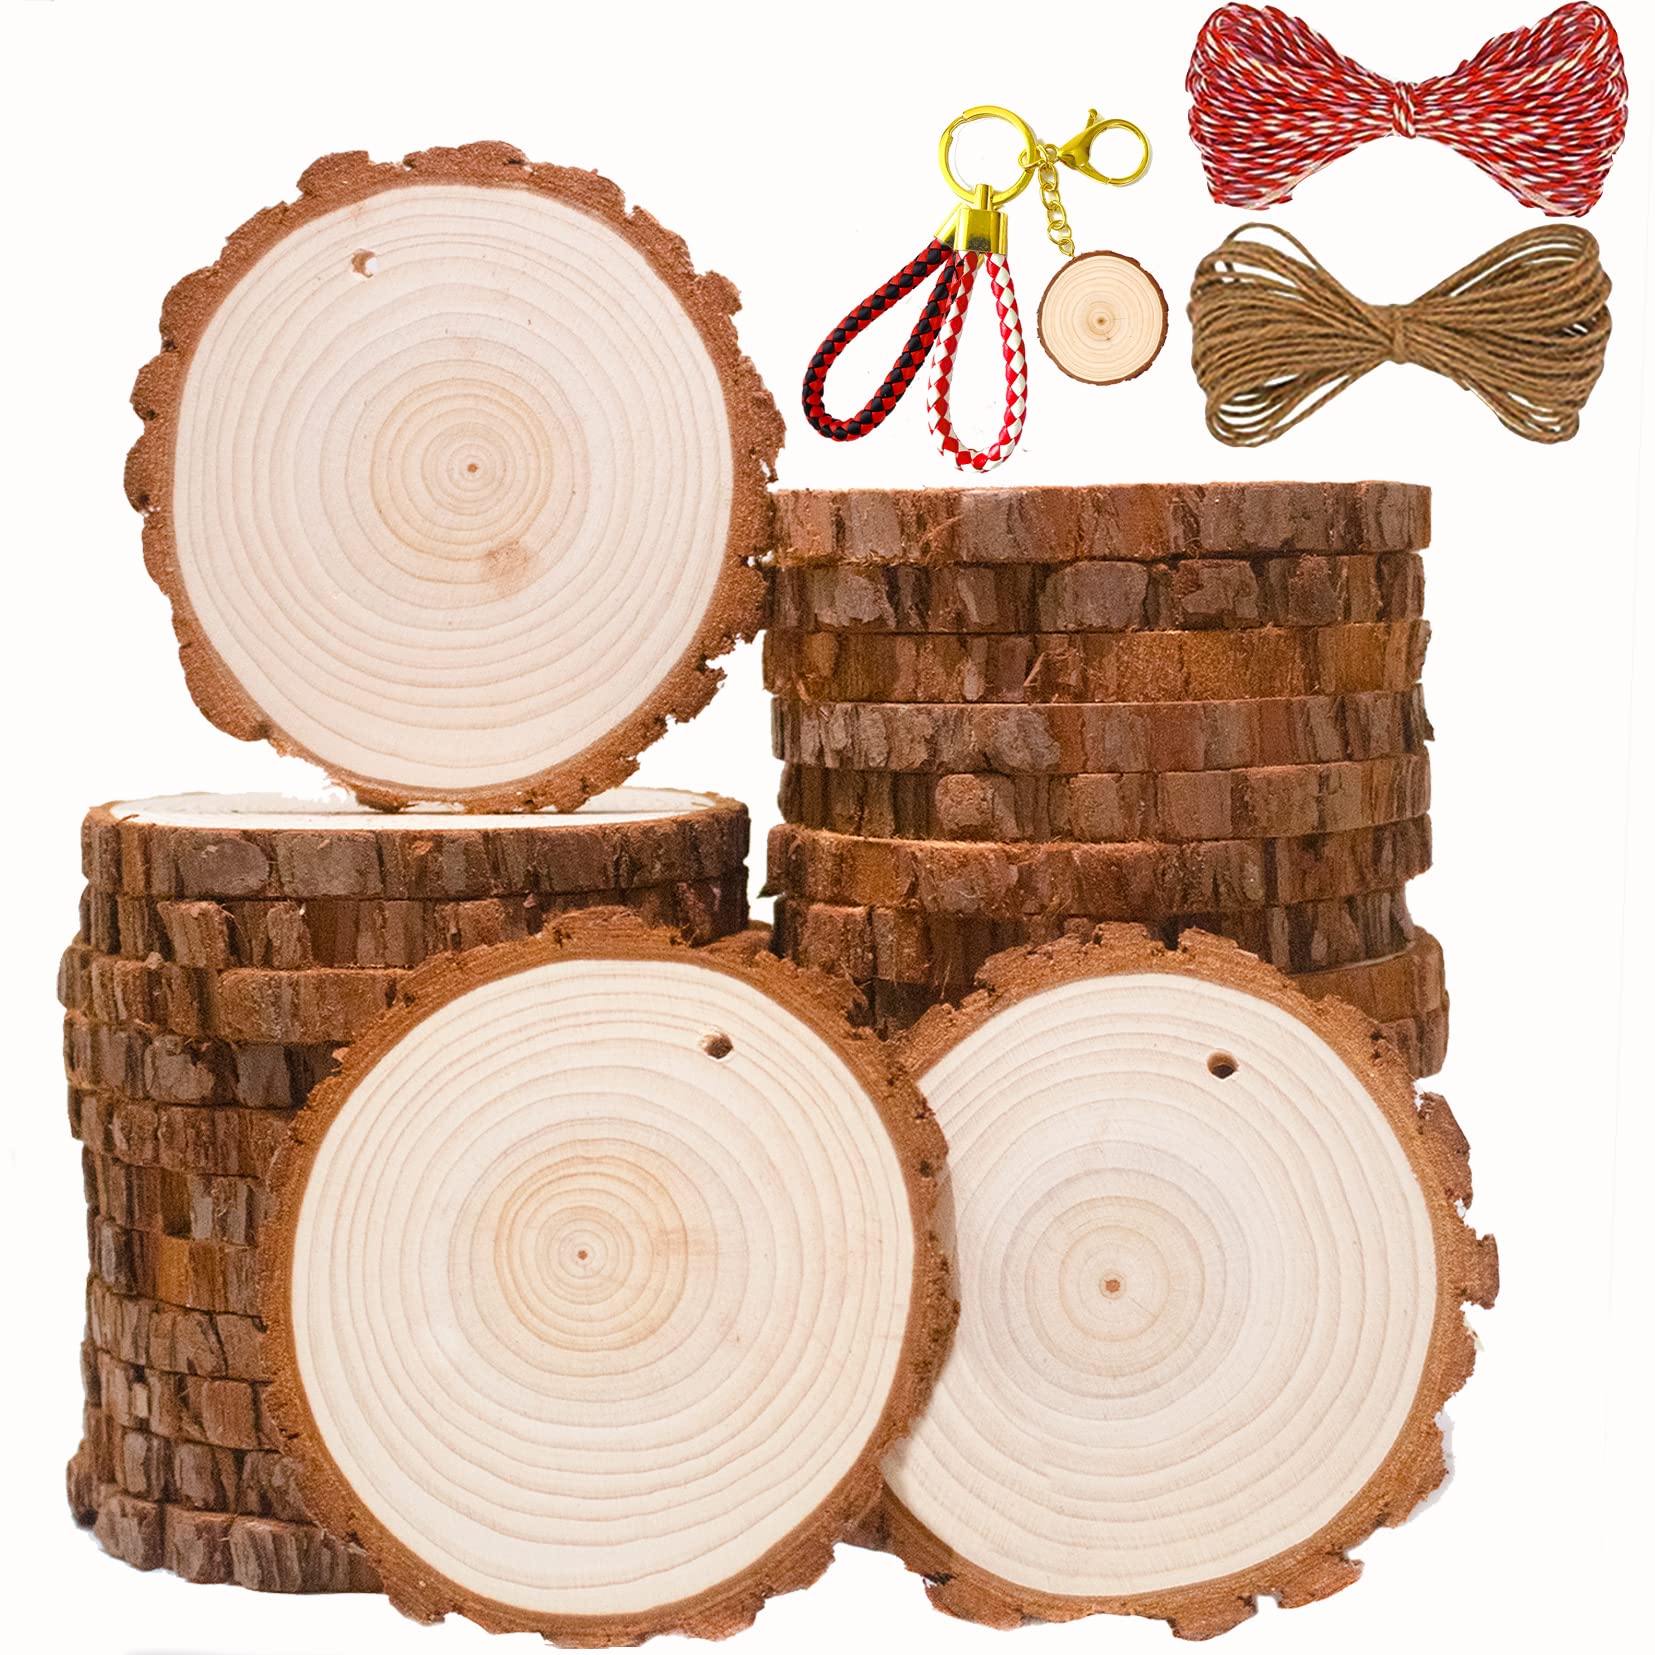 SENMUT Senmut Wood Slices 30 Pcs 31-36Inch Natural Rounds Unfinished Wooden  Circles Christmas Wood Ornaments For Crafts Wood Kit Predri